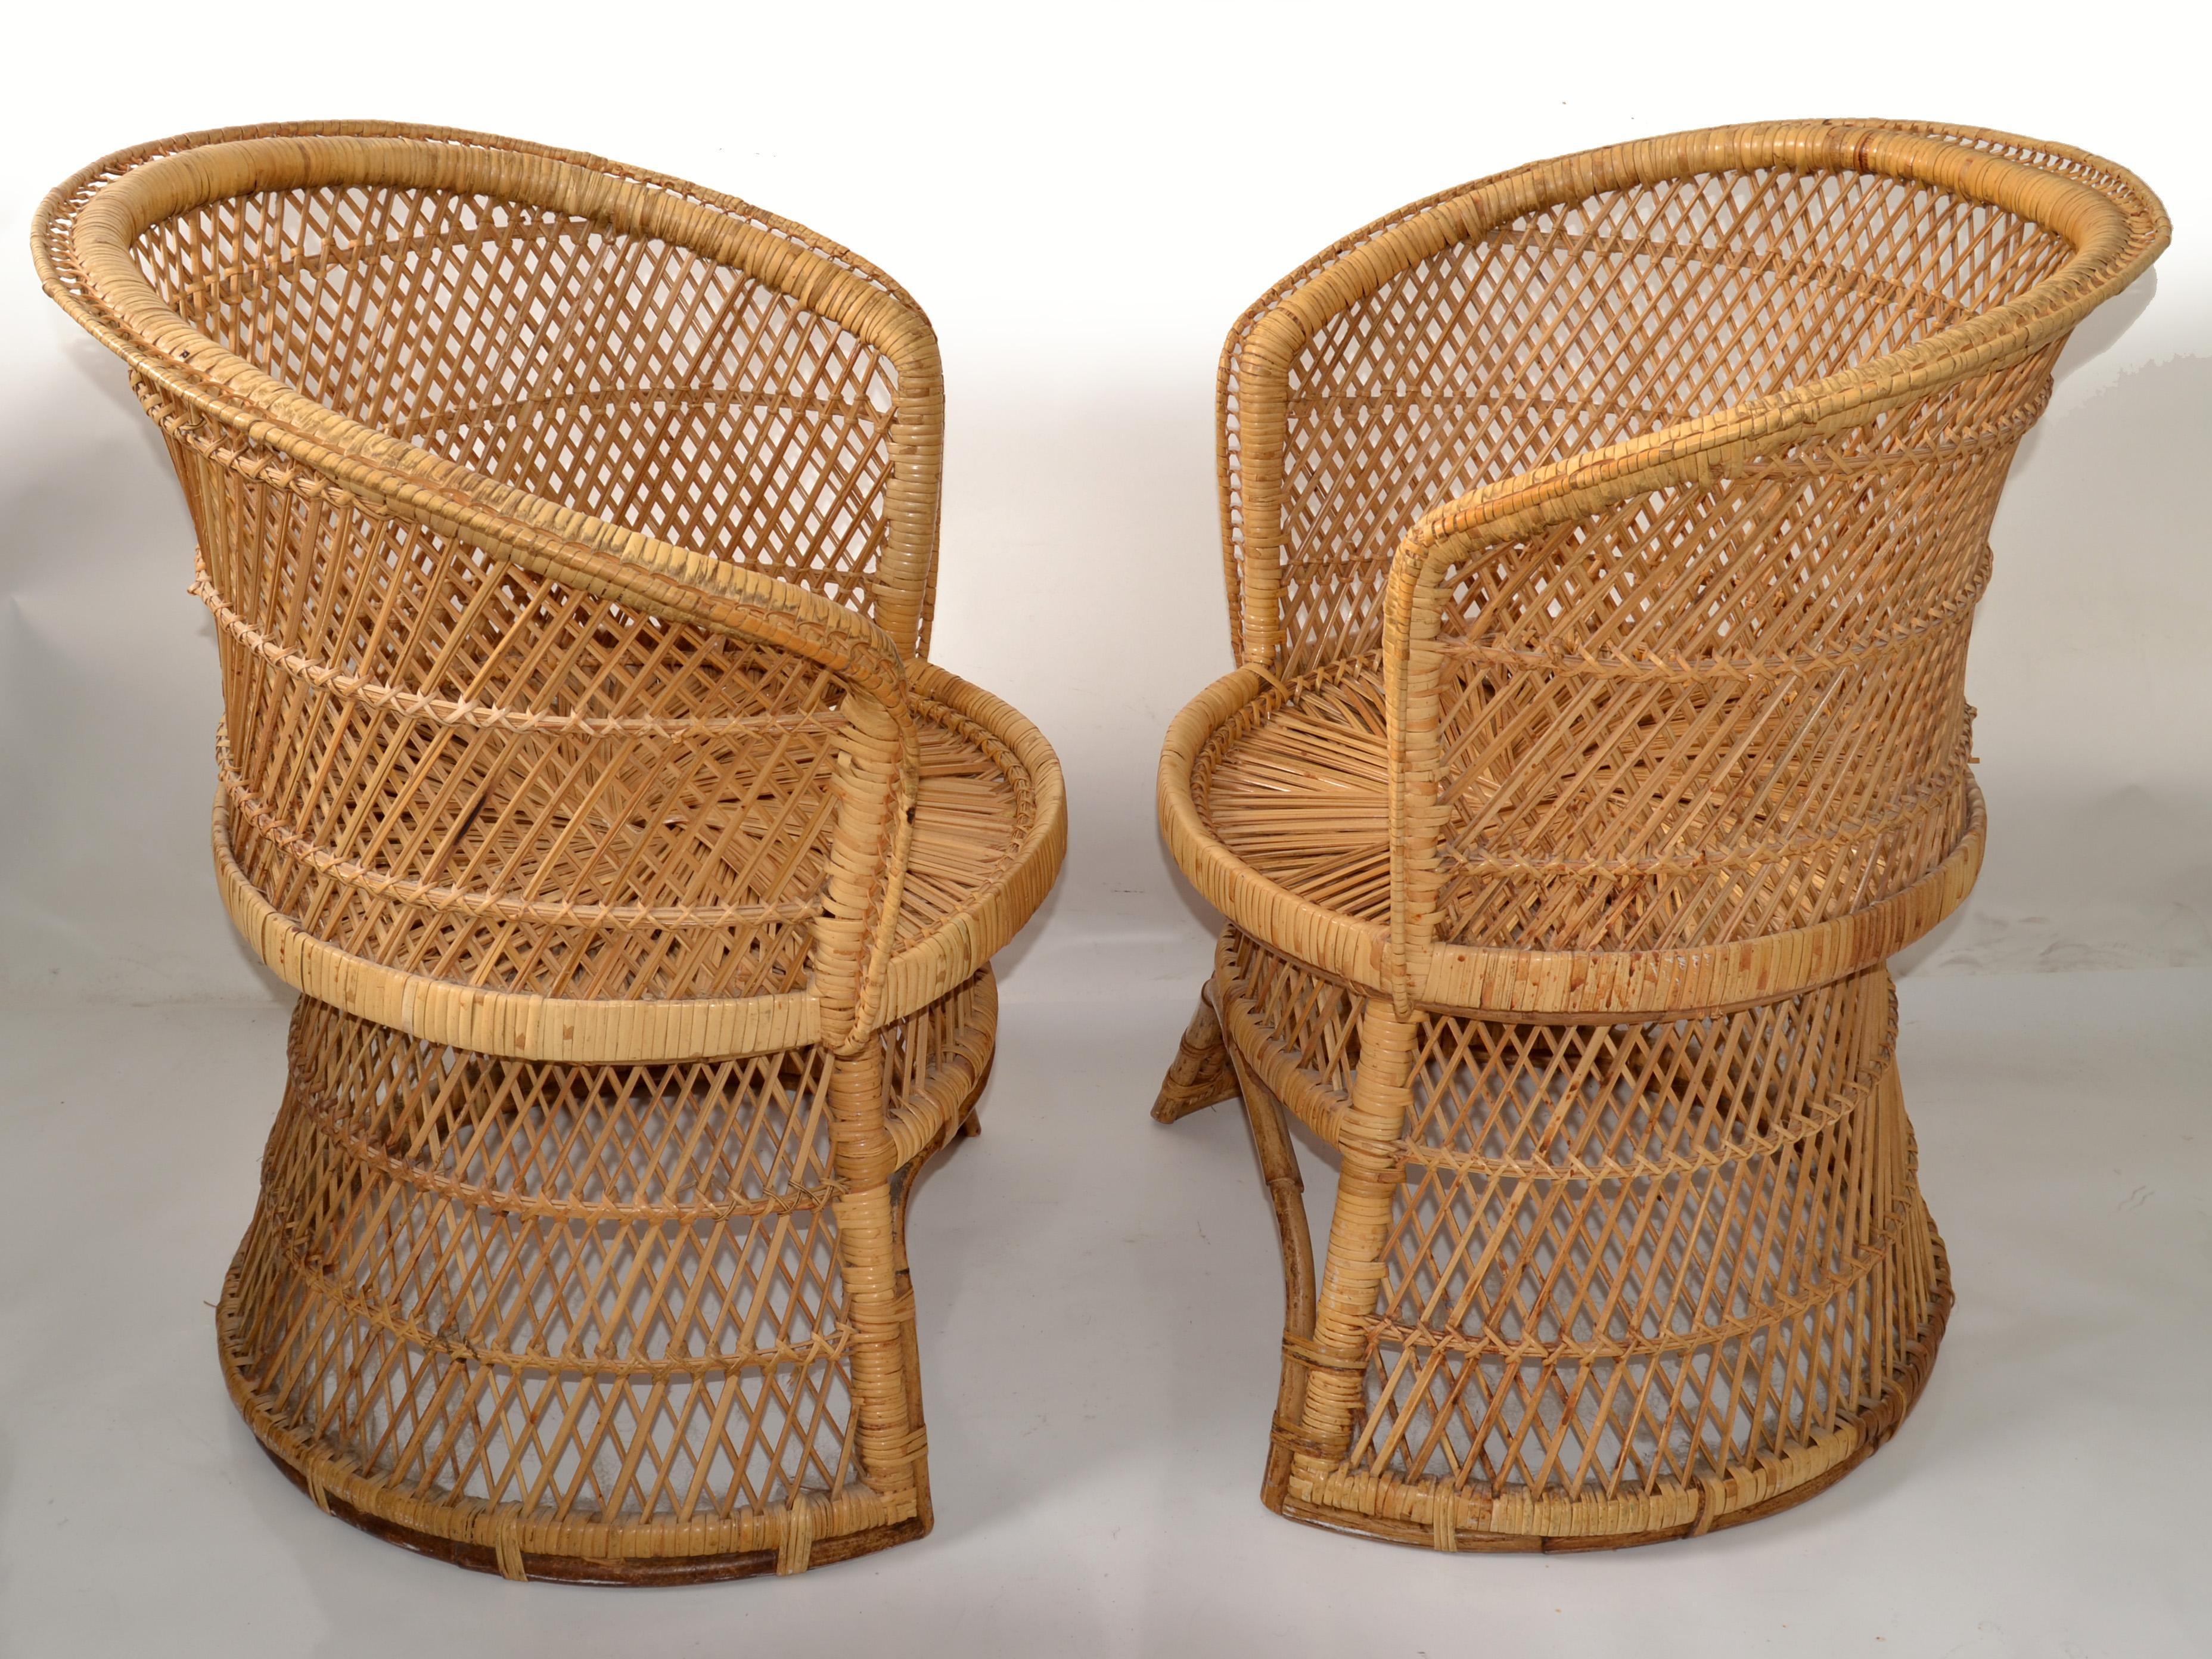 Vintage Set of Two Cane, Bamboo and Wicker armchairs. These are handcrafted chairs with cane seats feature bamboo frames and Chinese inspired bamboo patterns. The backrests are designed with an extraordinary pattern as shown in the pictures. This is